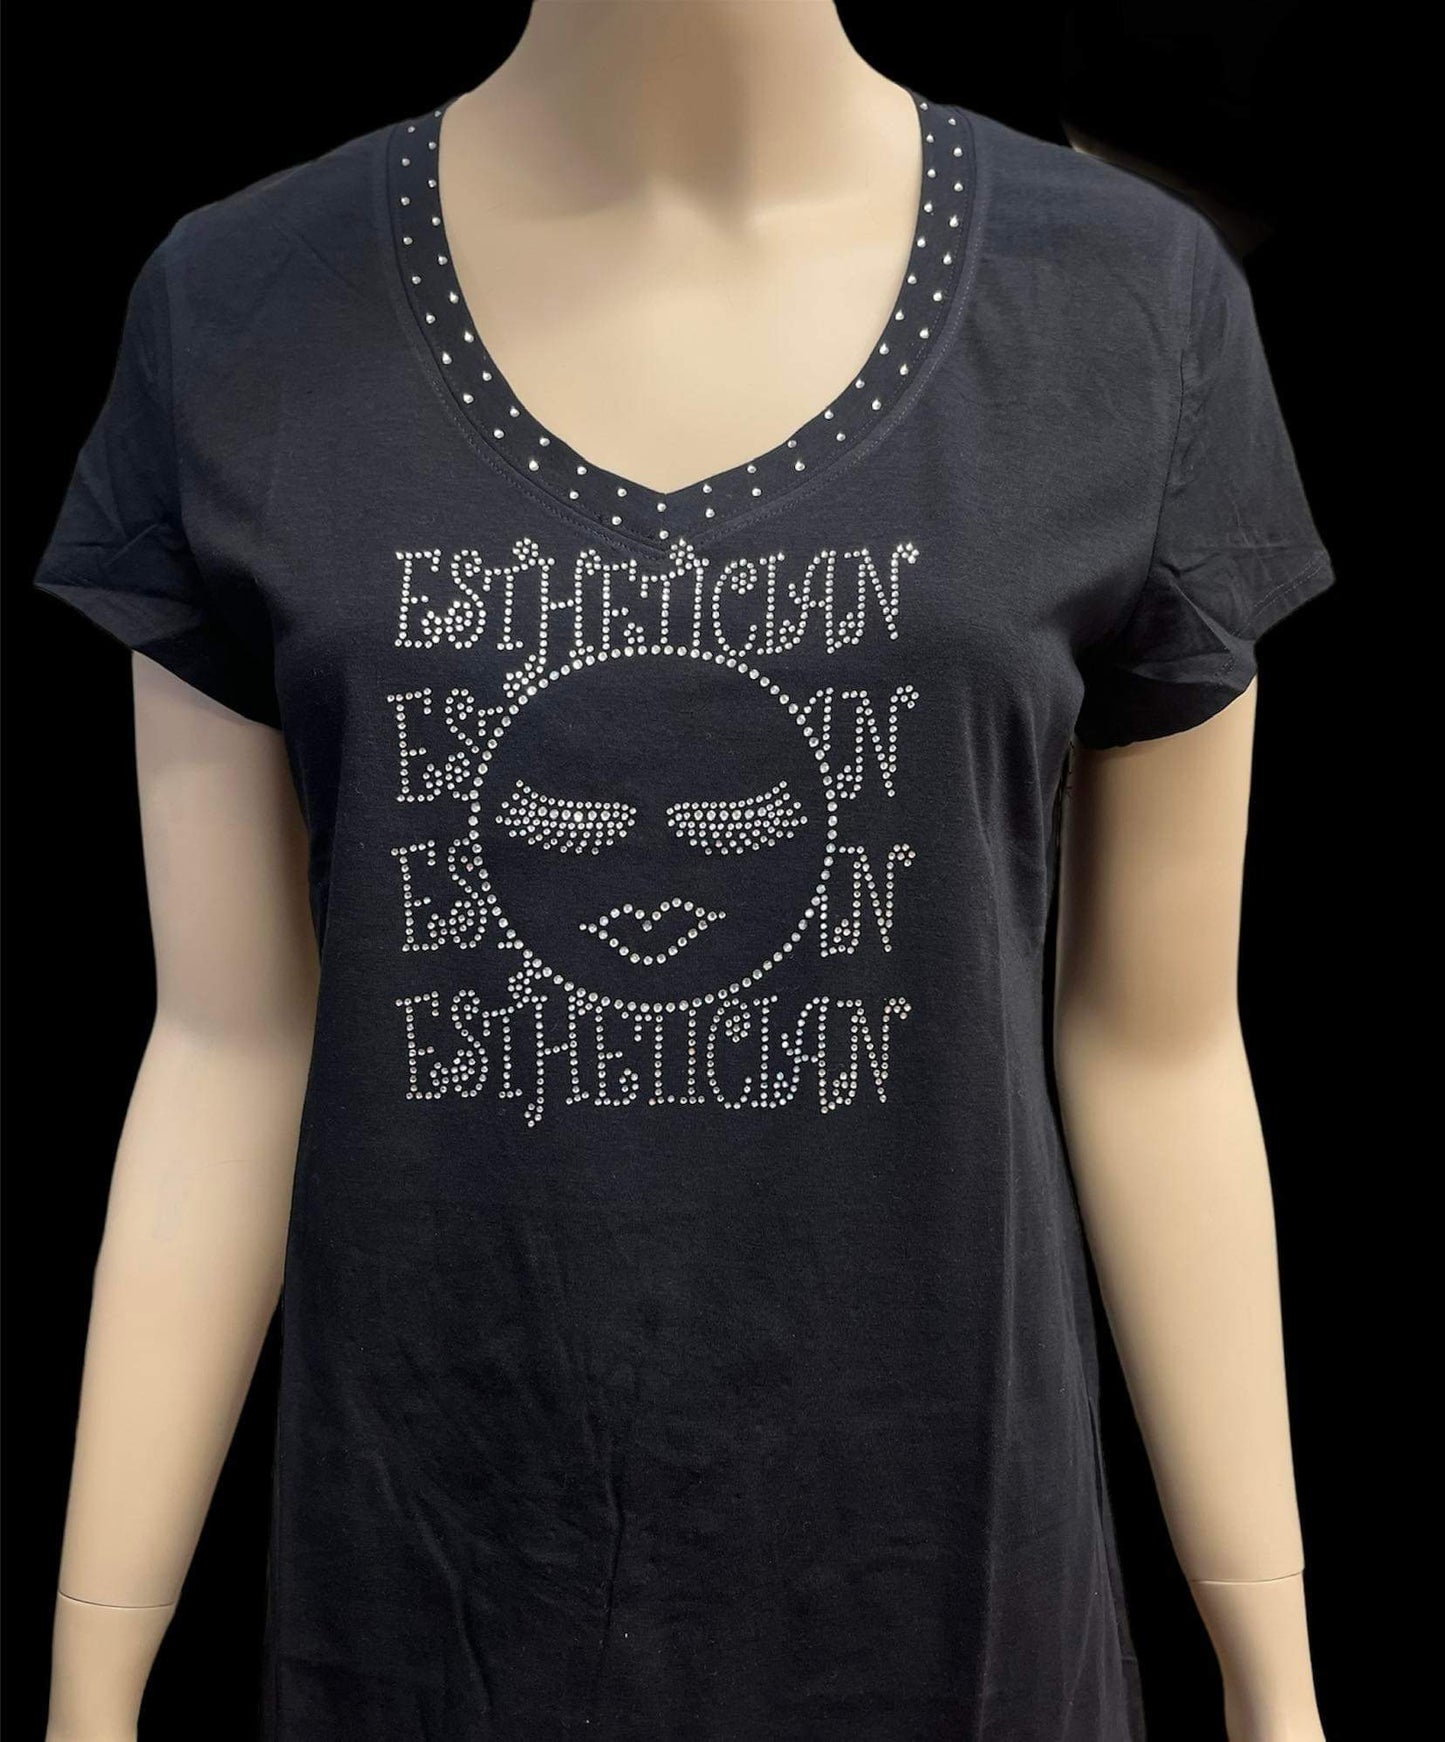 Smiley Esthetician Fitted Shirt